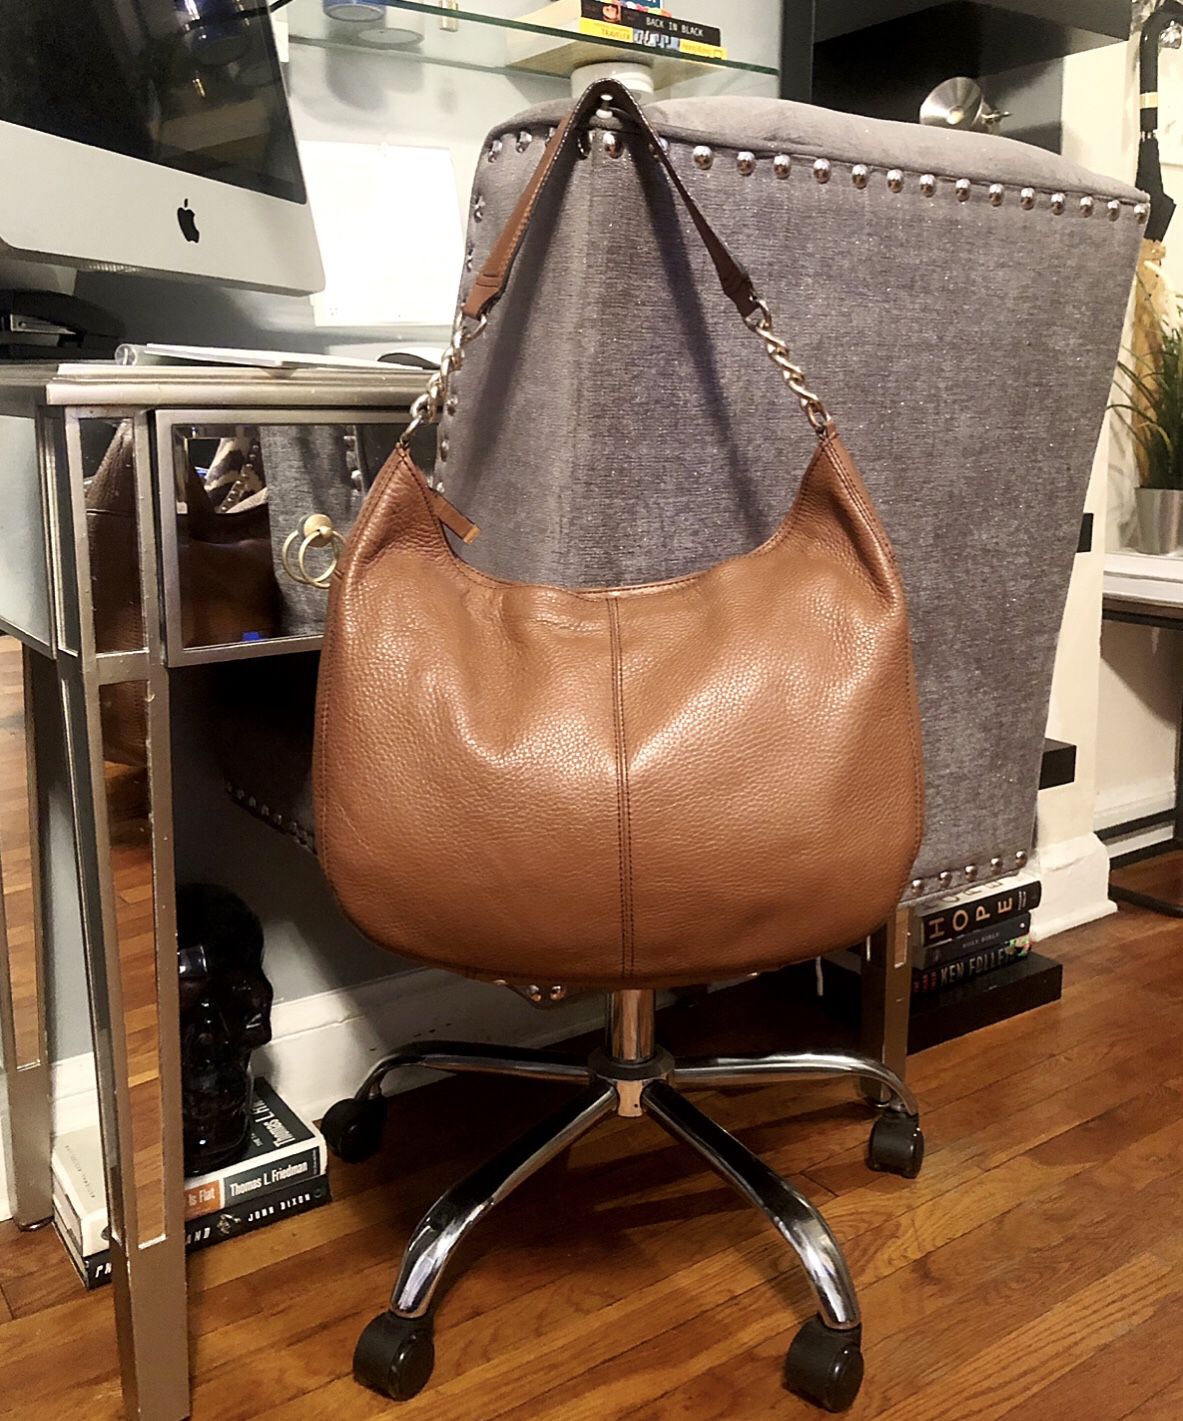 Calvin Klein hobo bag paid $235 good condition! It’s very soft pebble leather clean interior/exterior measurements 10.75 inches tall, 14 inches wide